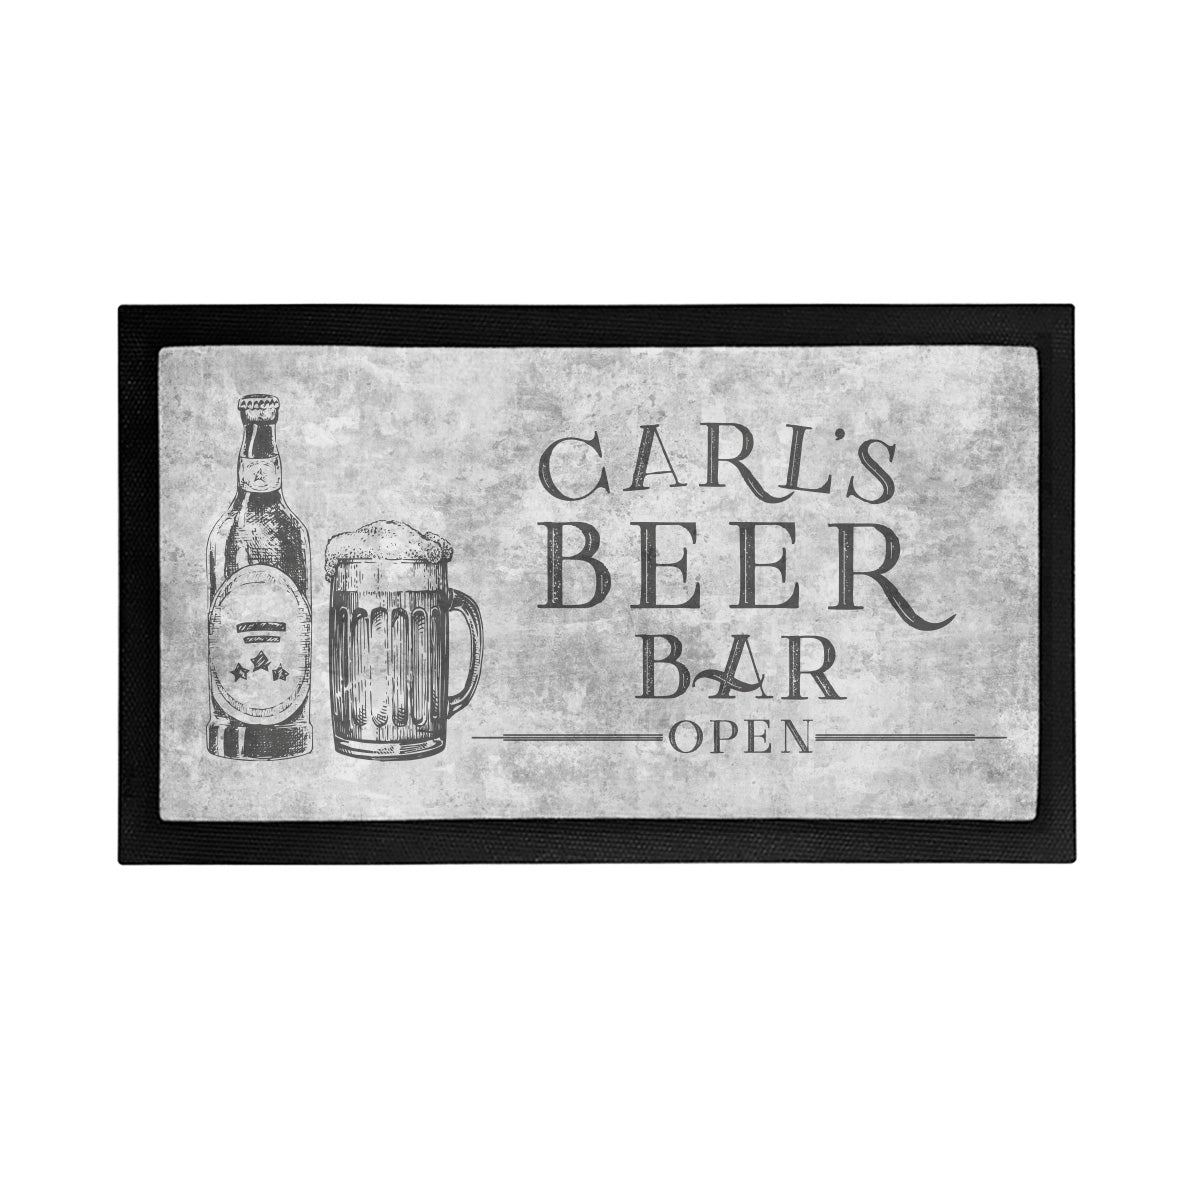 Personalized Beer Bar is Open Mat - Placemat Style Rubber Bar Mat